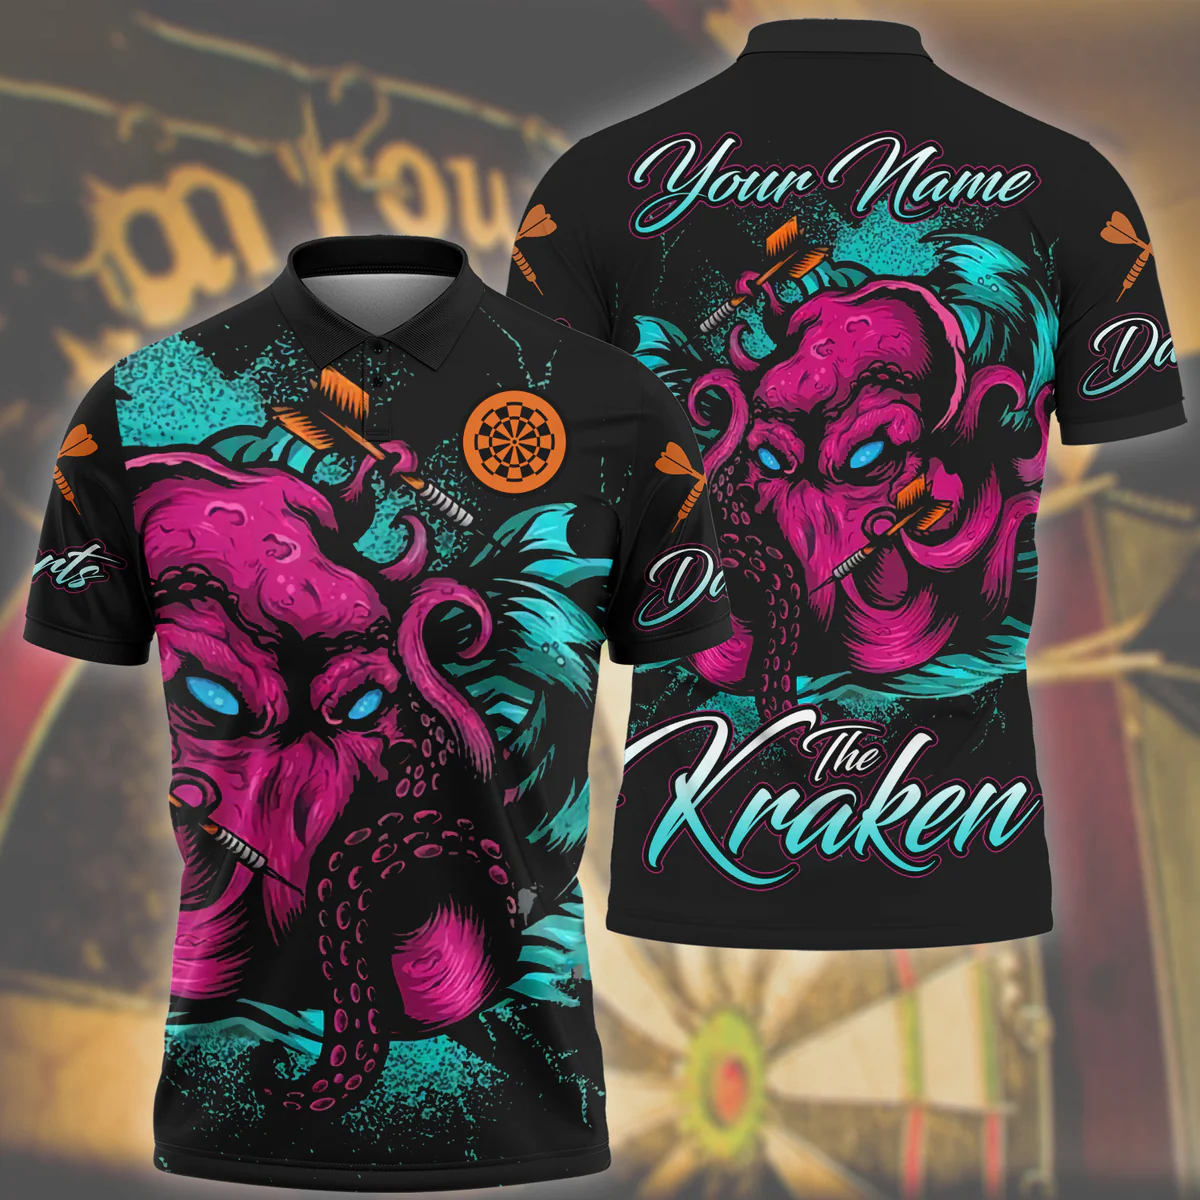 Personalized Name Darts All Over Printed Unisex Polo Shirt/ The Kraken Dart Shirt